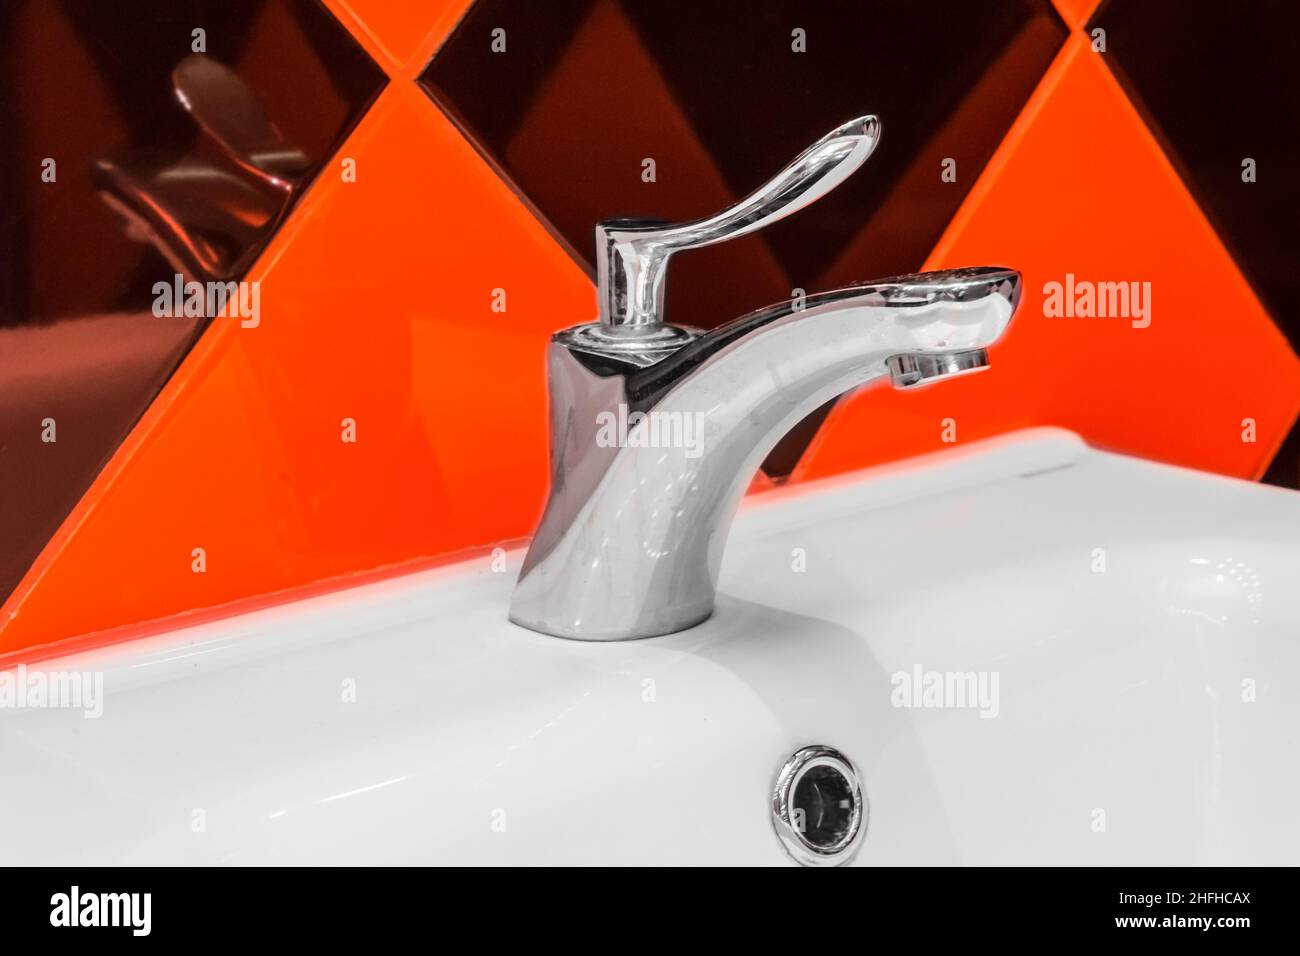 Steel faucet and sink home hygiene kitchen or bathroom. Stock Photo